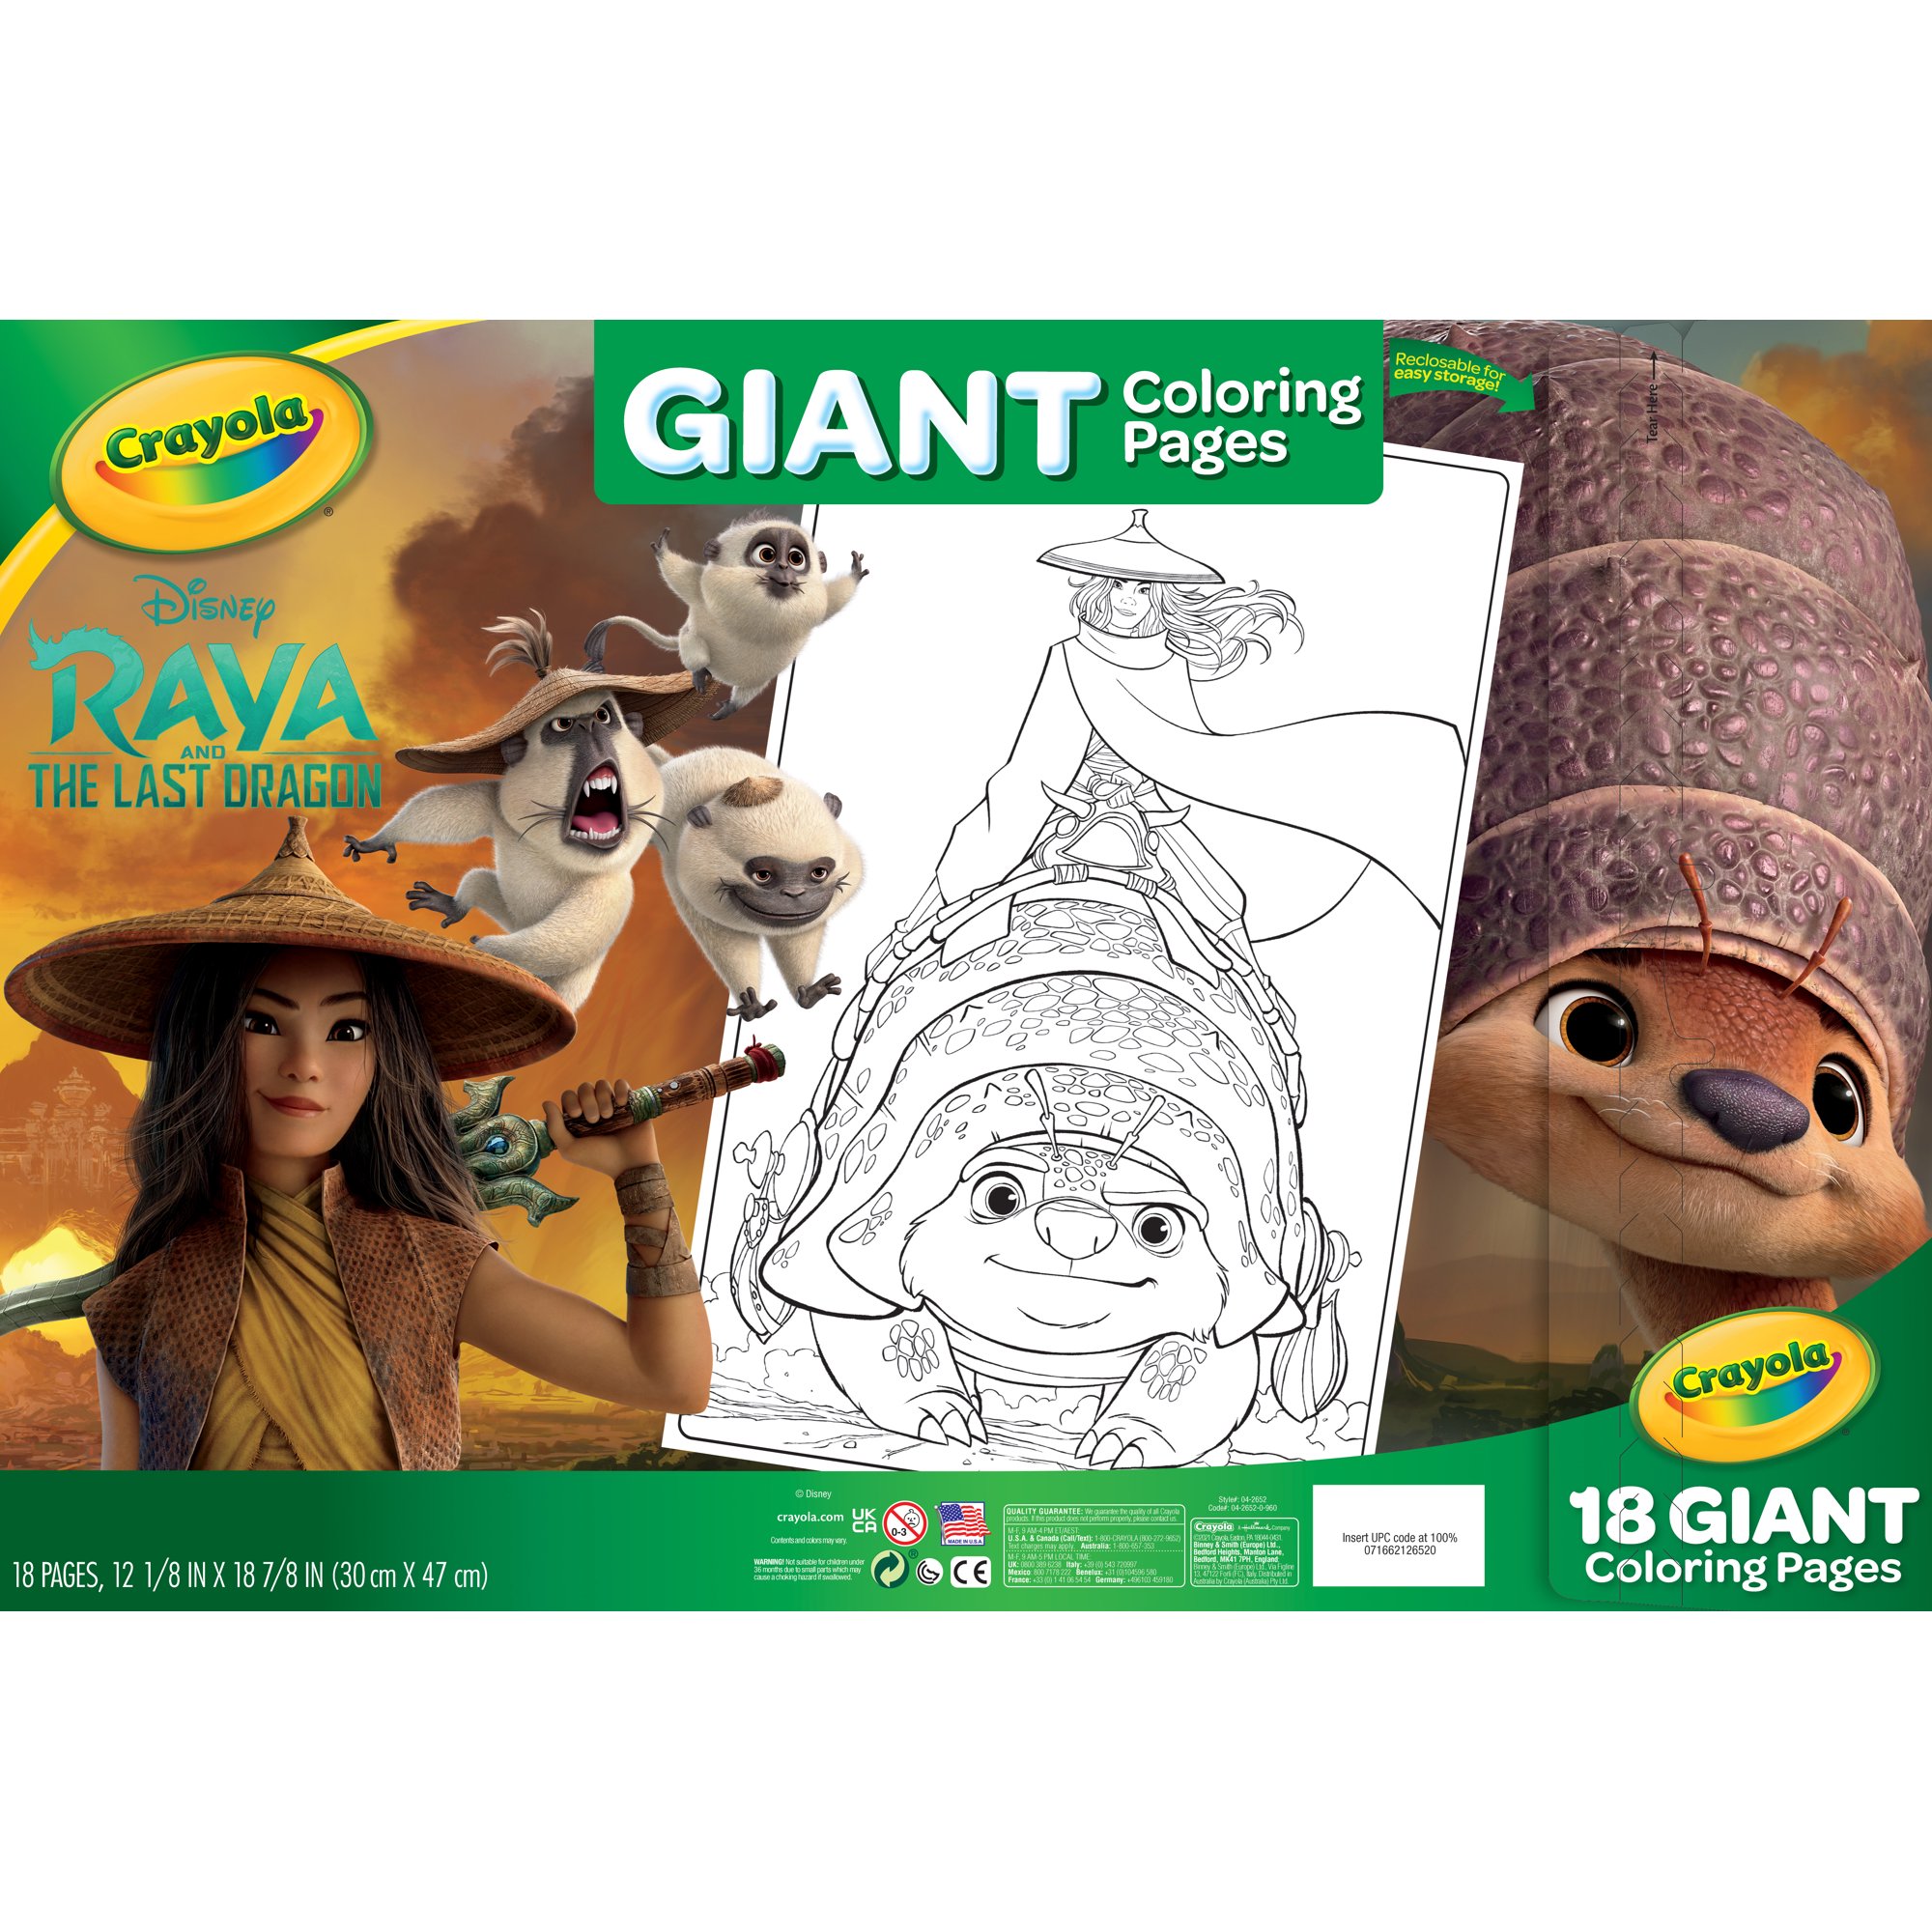 Giant Coloring Pages – Raya and The Last Dragon – Awesome Toys Gifts